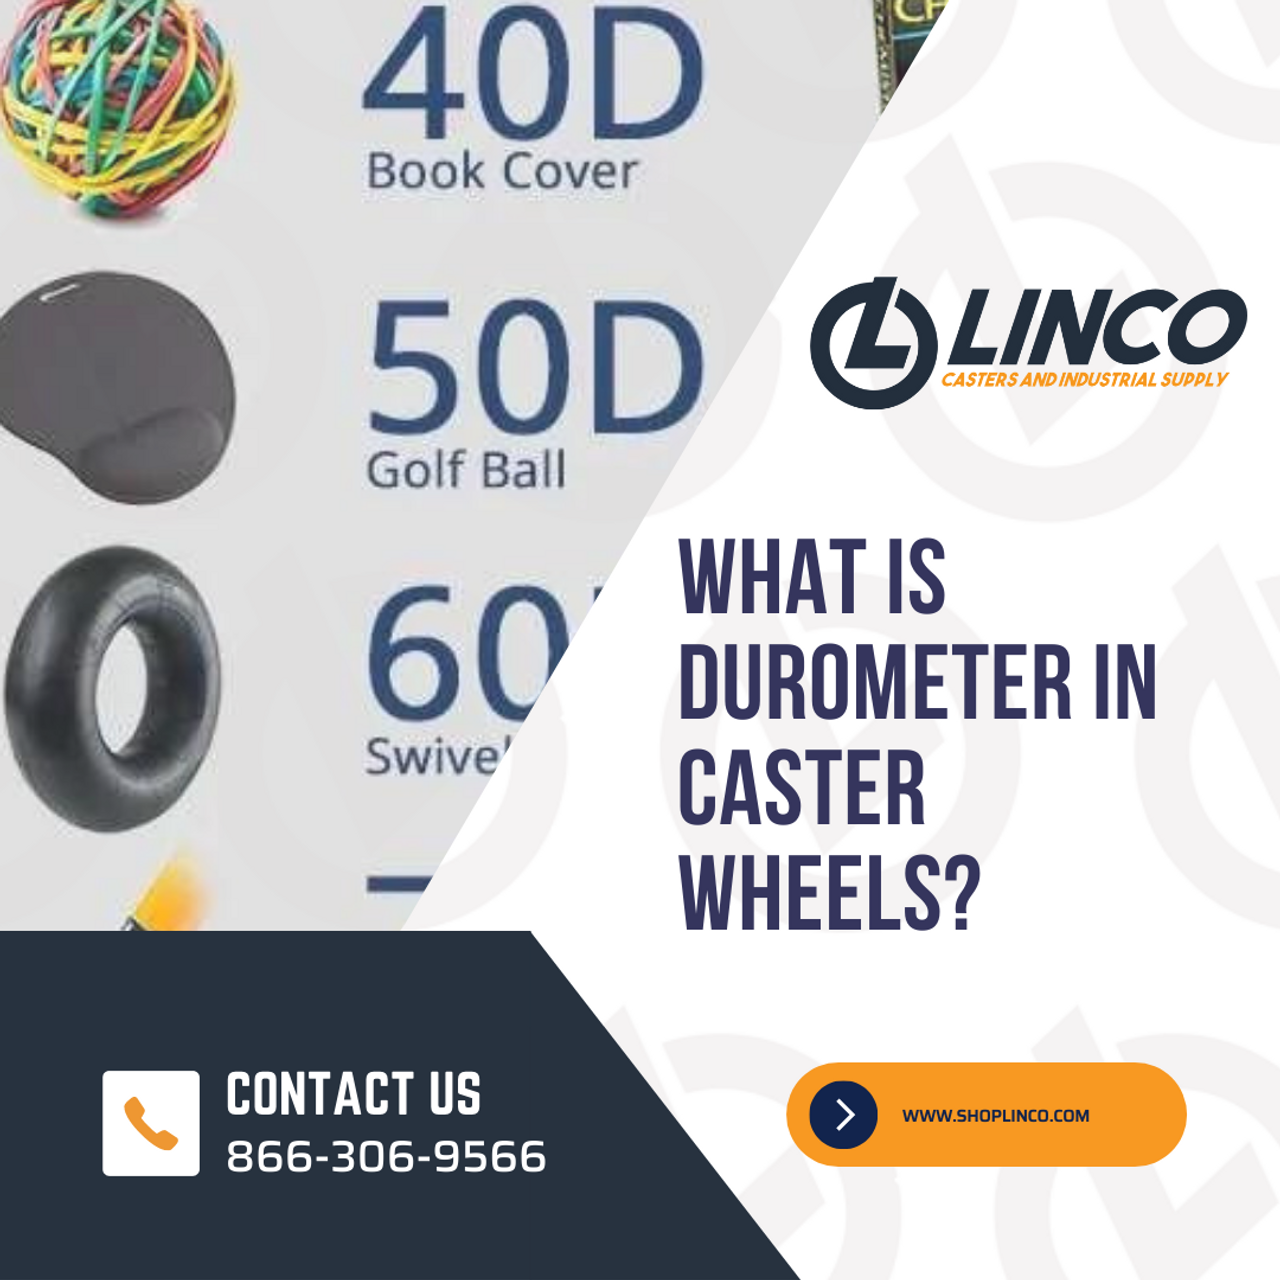 What Is Durometer in Caster Wheels?